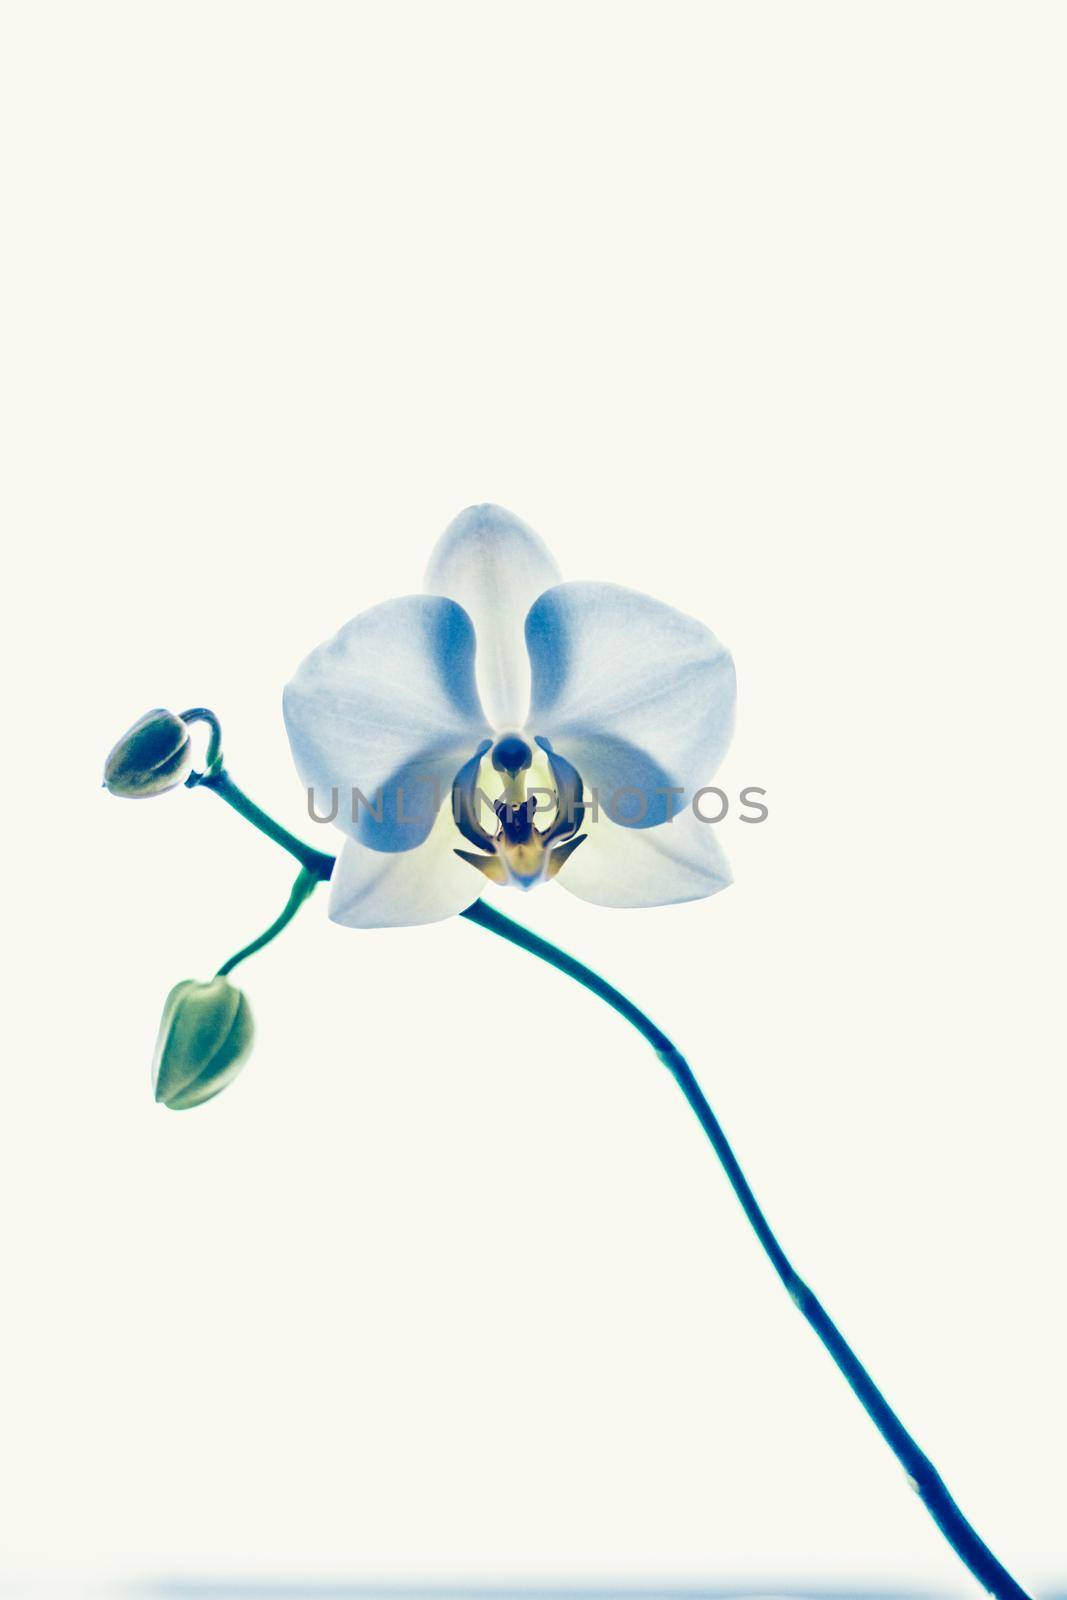 Orchid flower in bloom, abstract floral art background by Anneleven